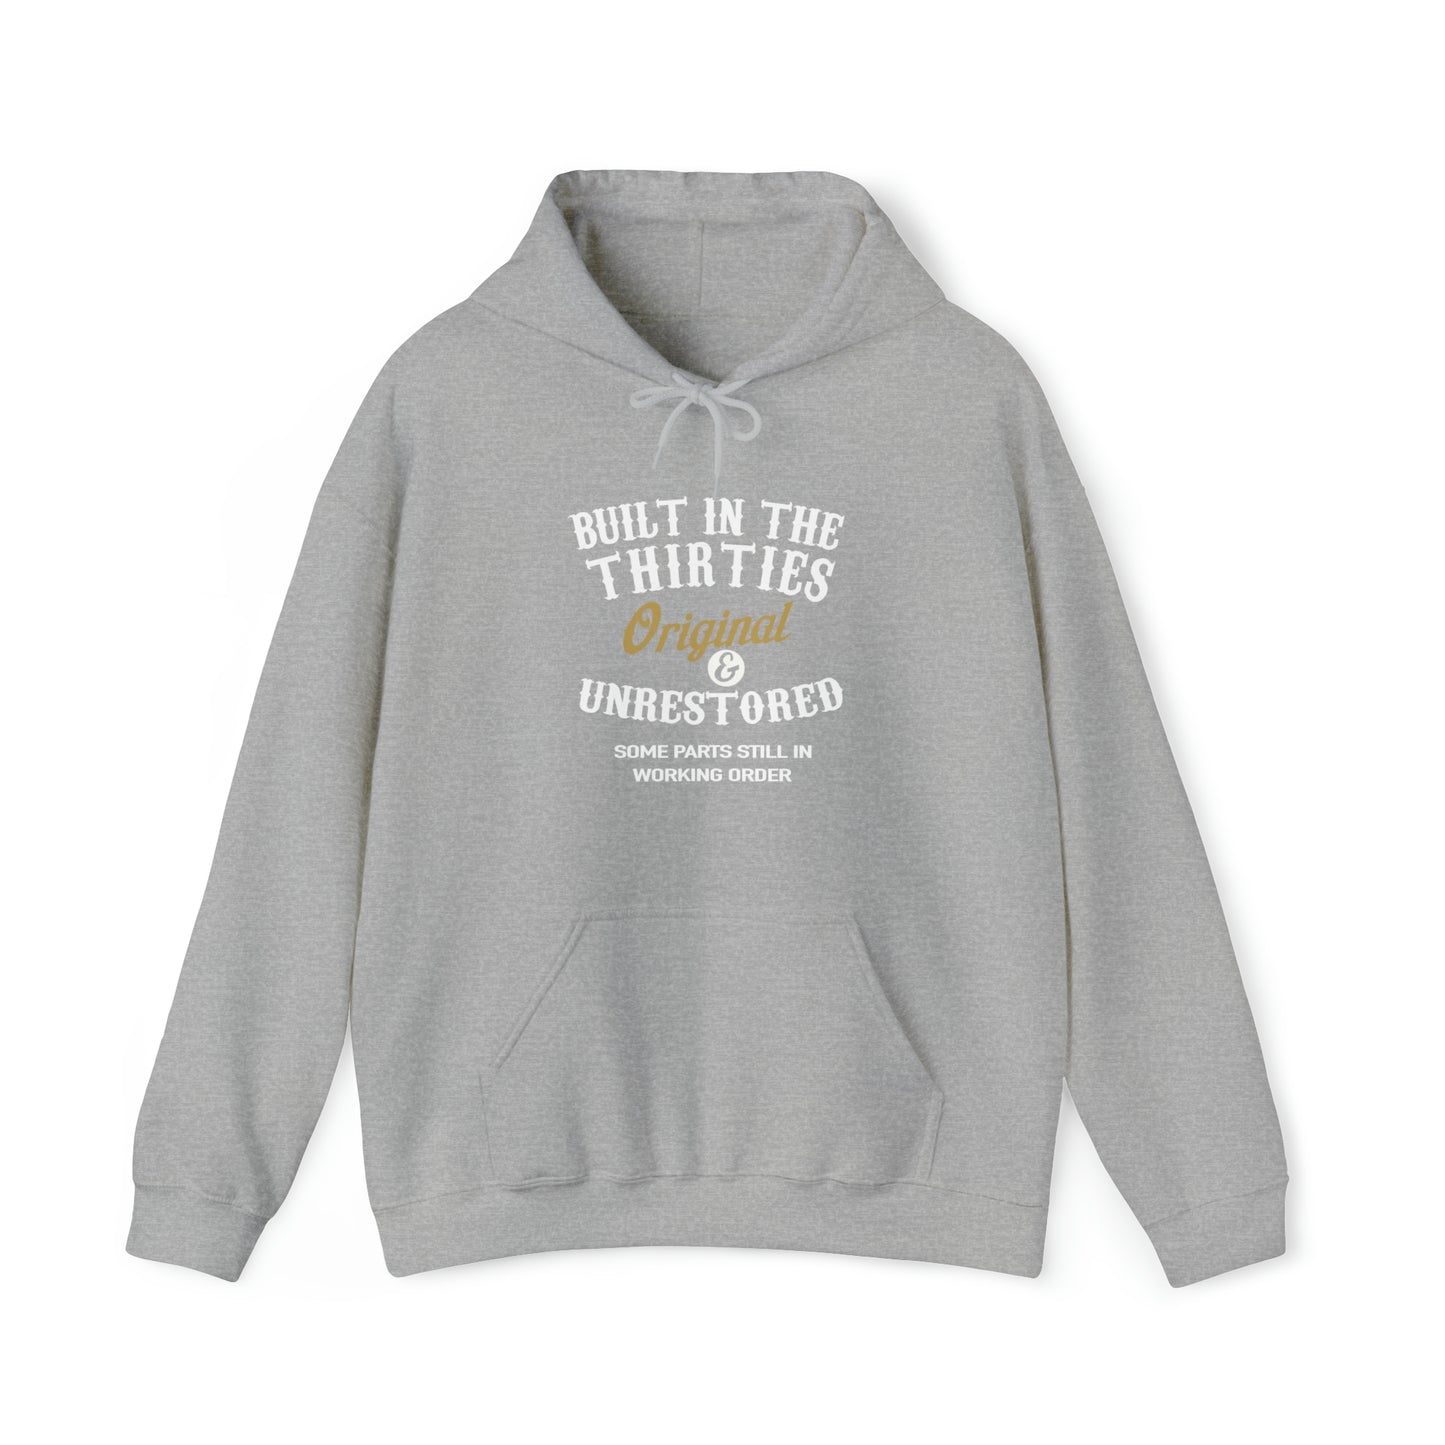 Resilient Relic: The Time-Honored Hooded Sweatshirt Reflecting the Tenacity of the 1930s